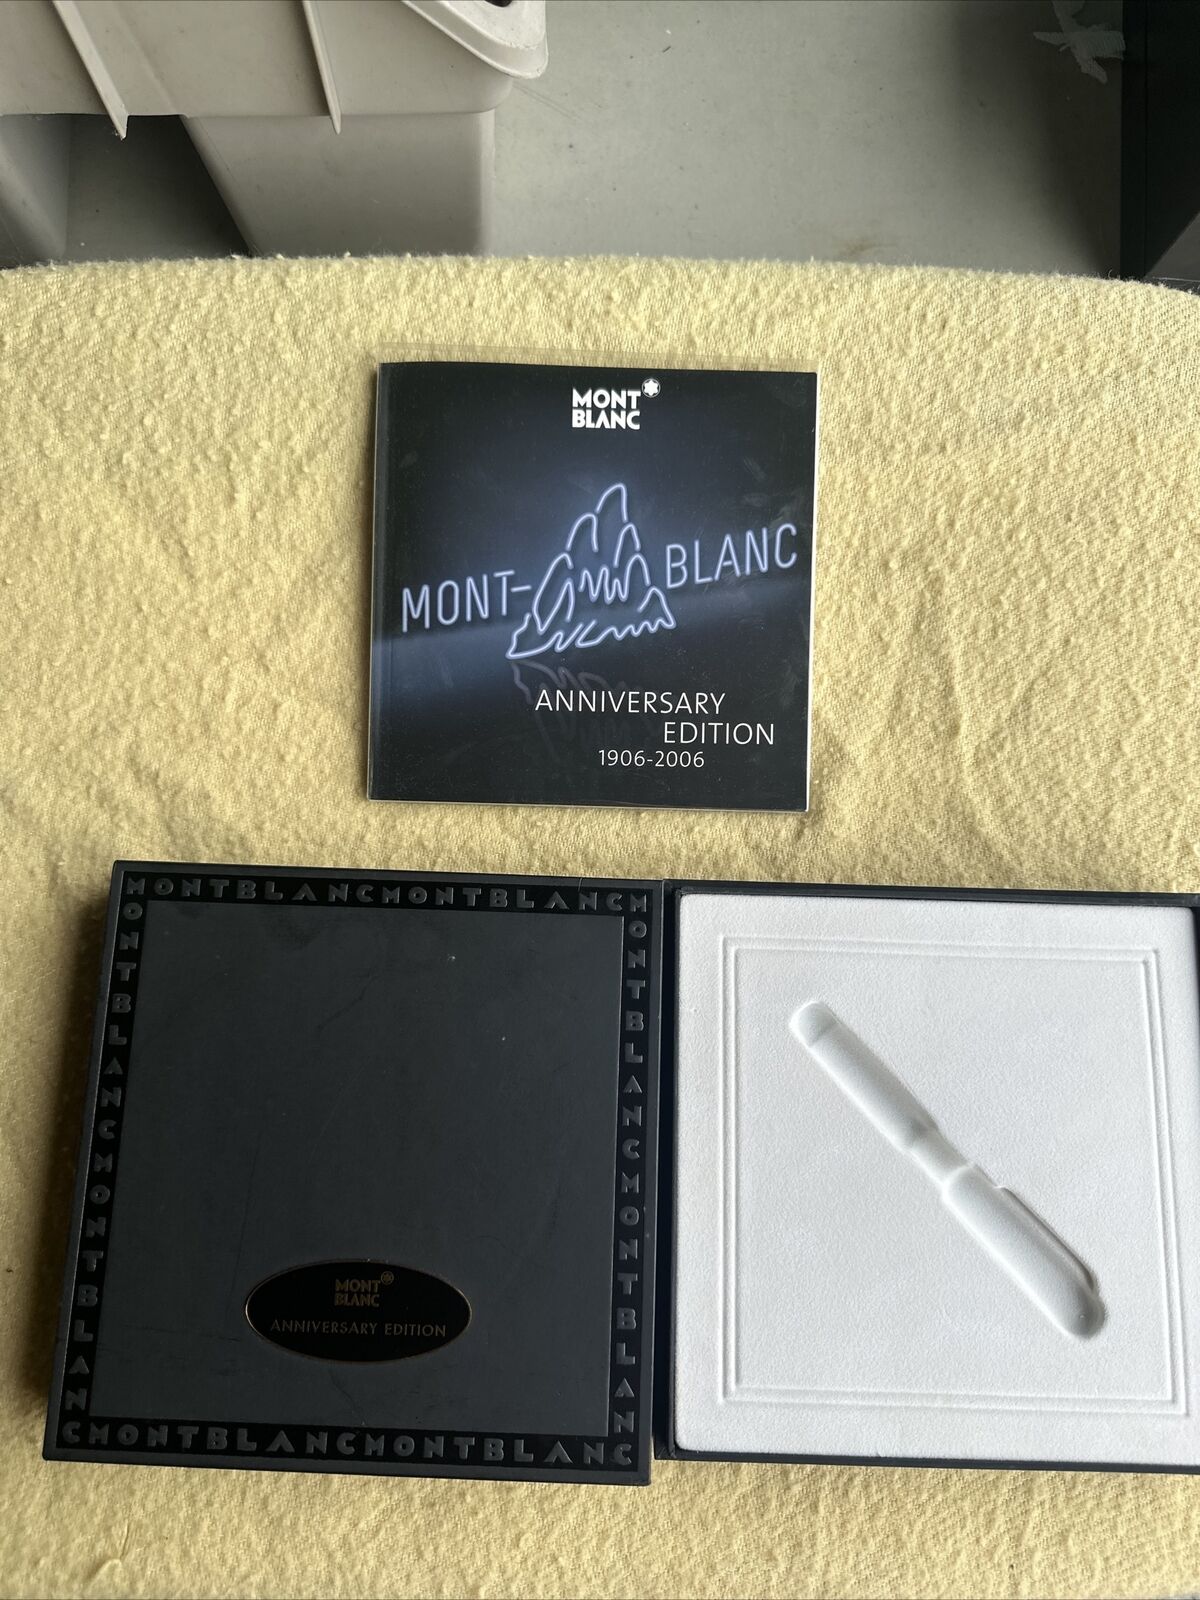 montblanc fountain pen limited edition Anniversary Edition 1906 - 2006 Empty box